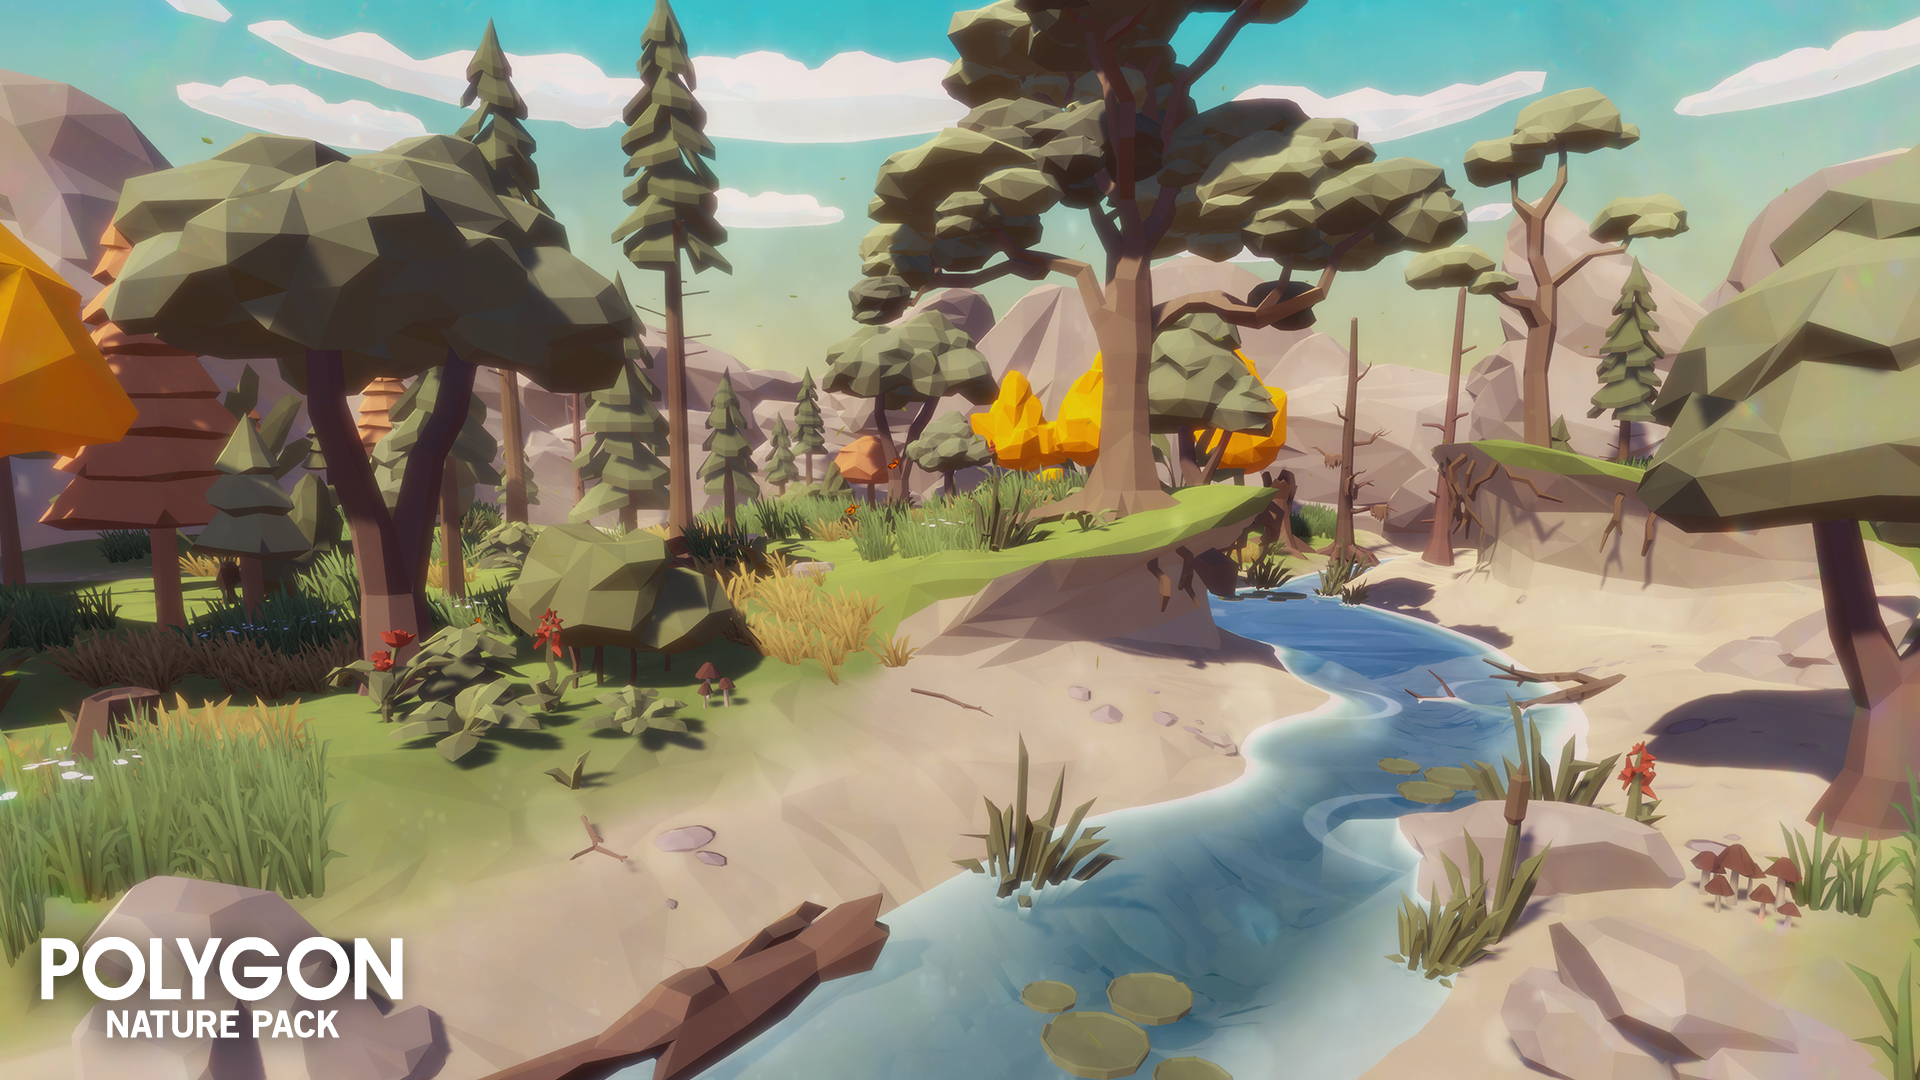 POLYGON - Nature Pack - Synty Studios - Unity and Unreal 3D low poly assets for game development